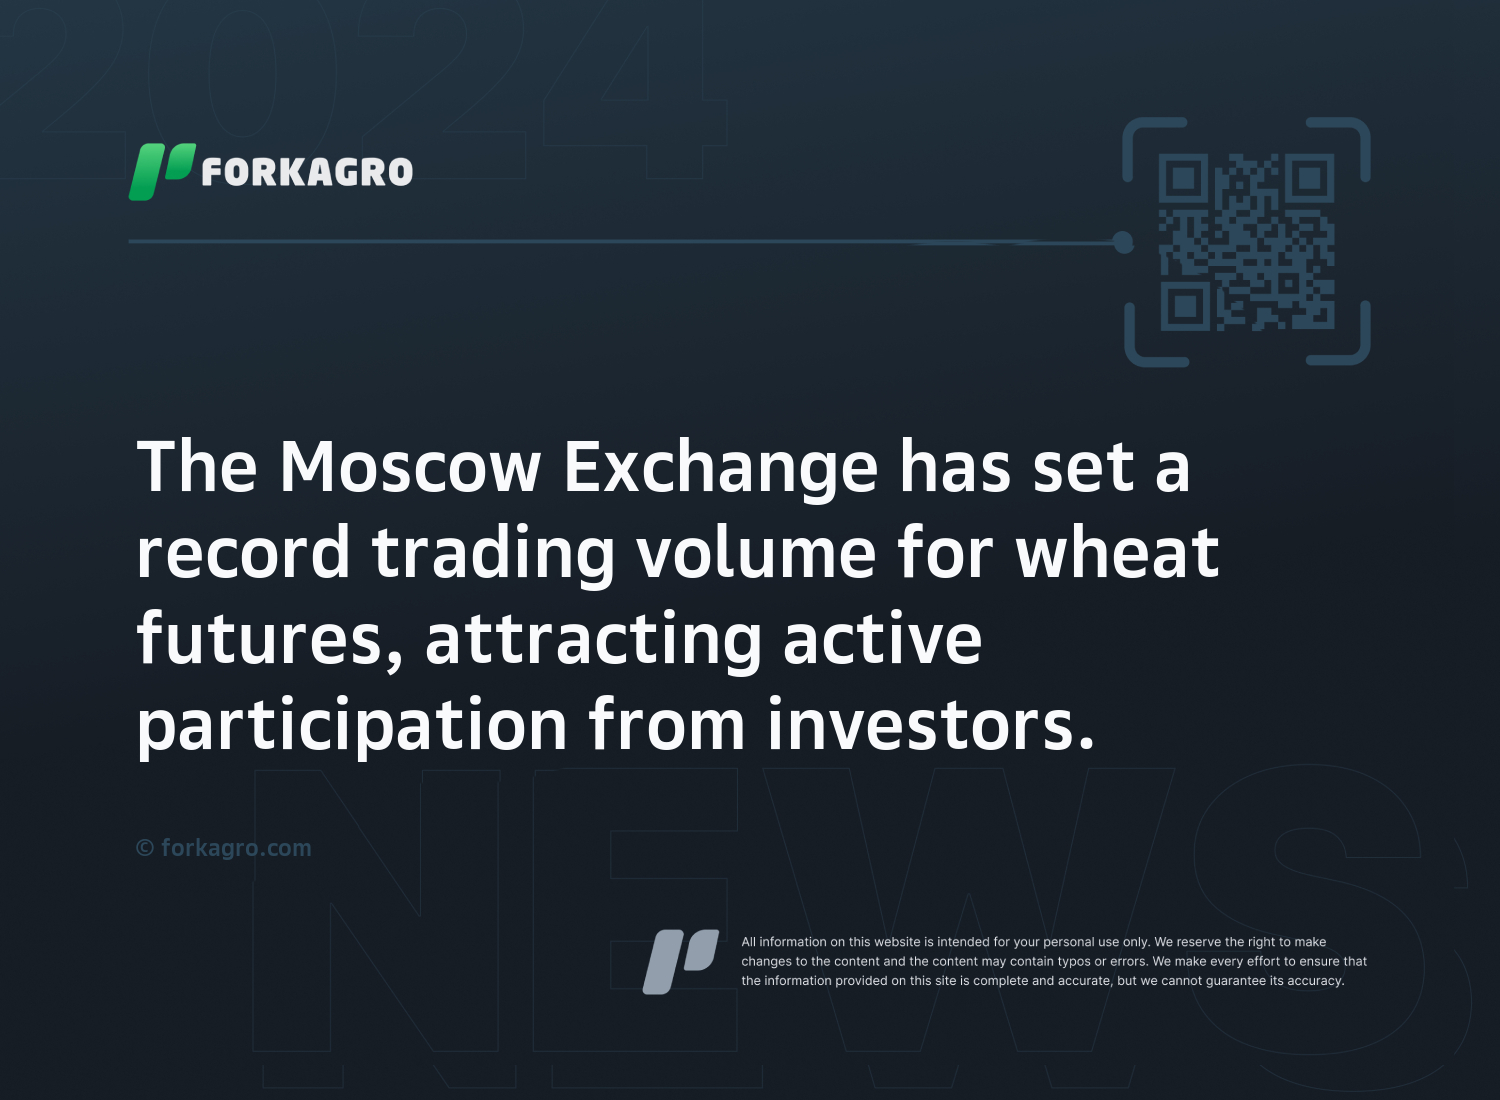 The Moscow Exchange has set a record trading volume for wheat futures, attracting active participation from investors.